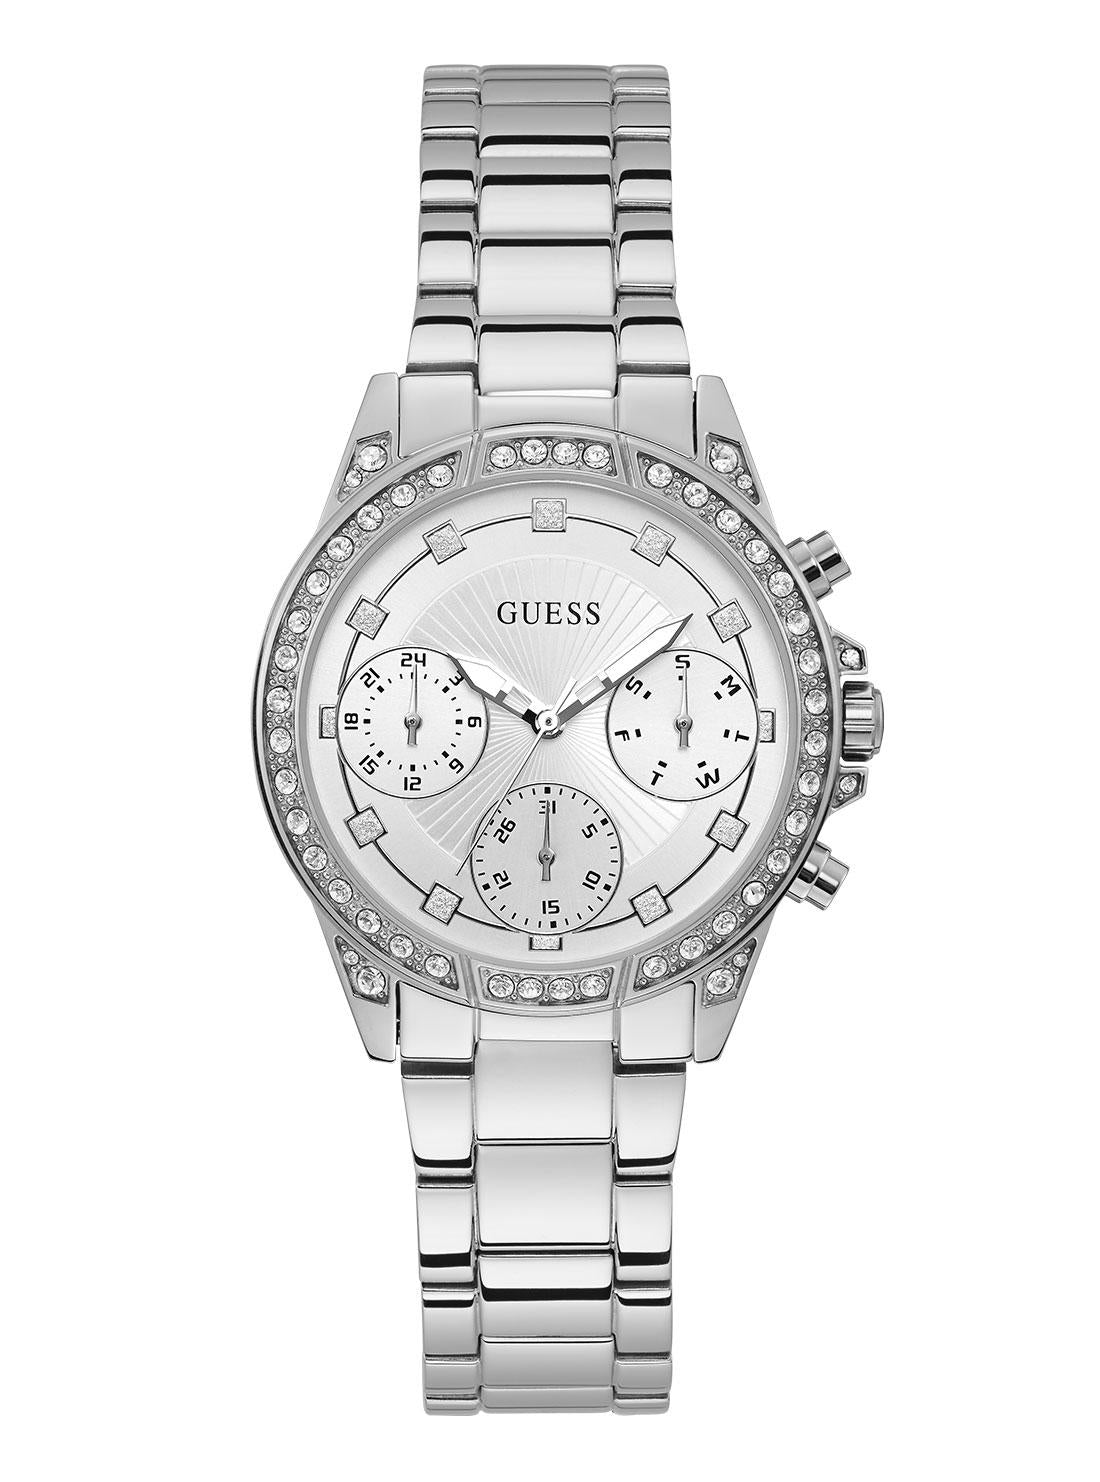 GUESS Womens Silver Gemini Crystal Watch W1293L1 Front View